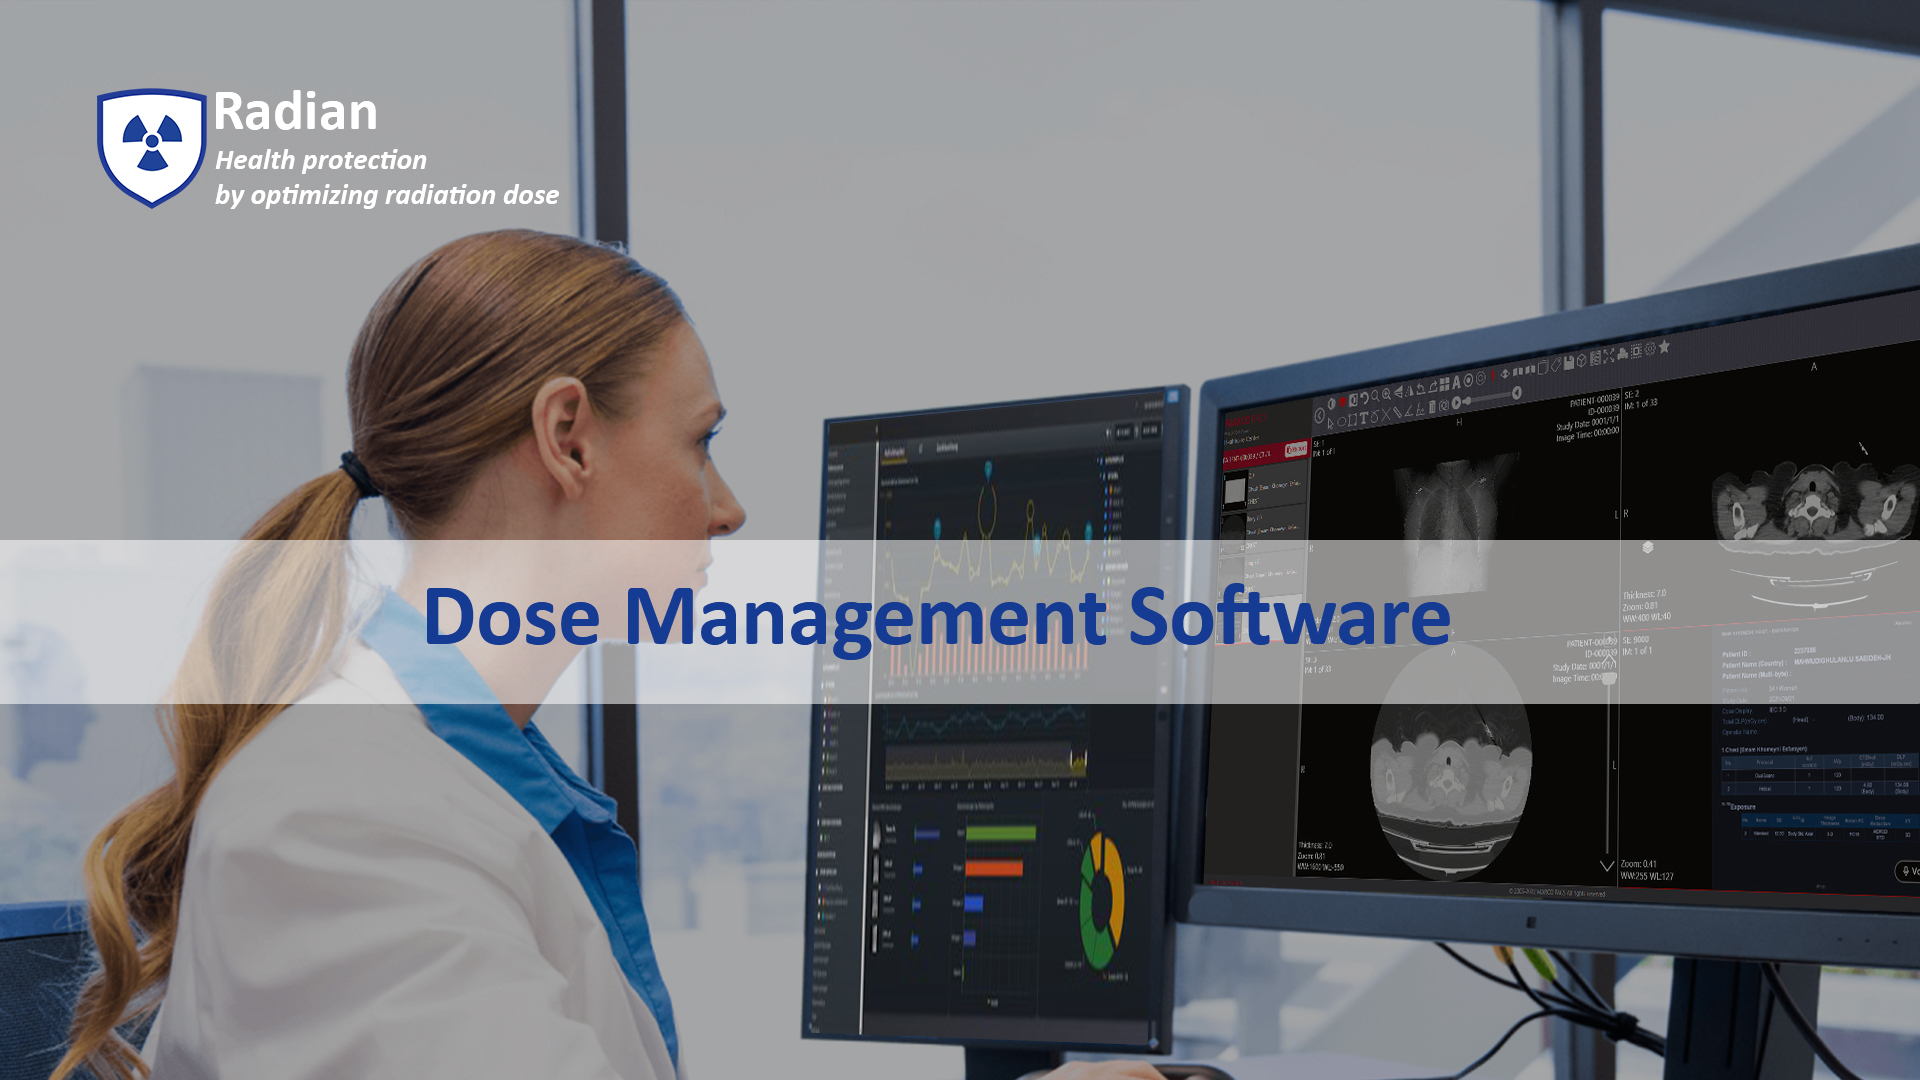 What is Dose Management Software?